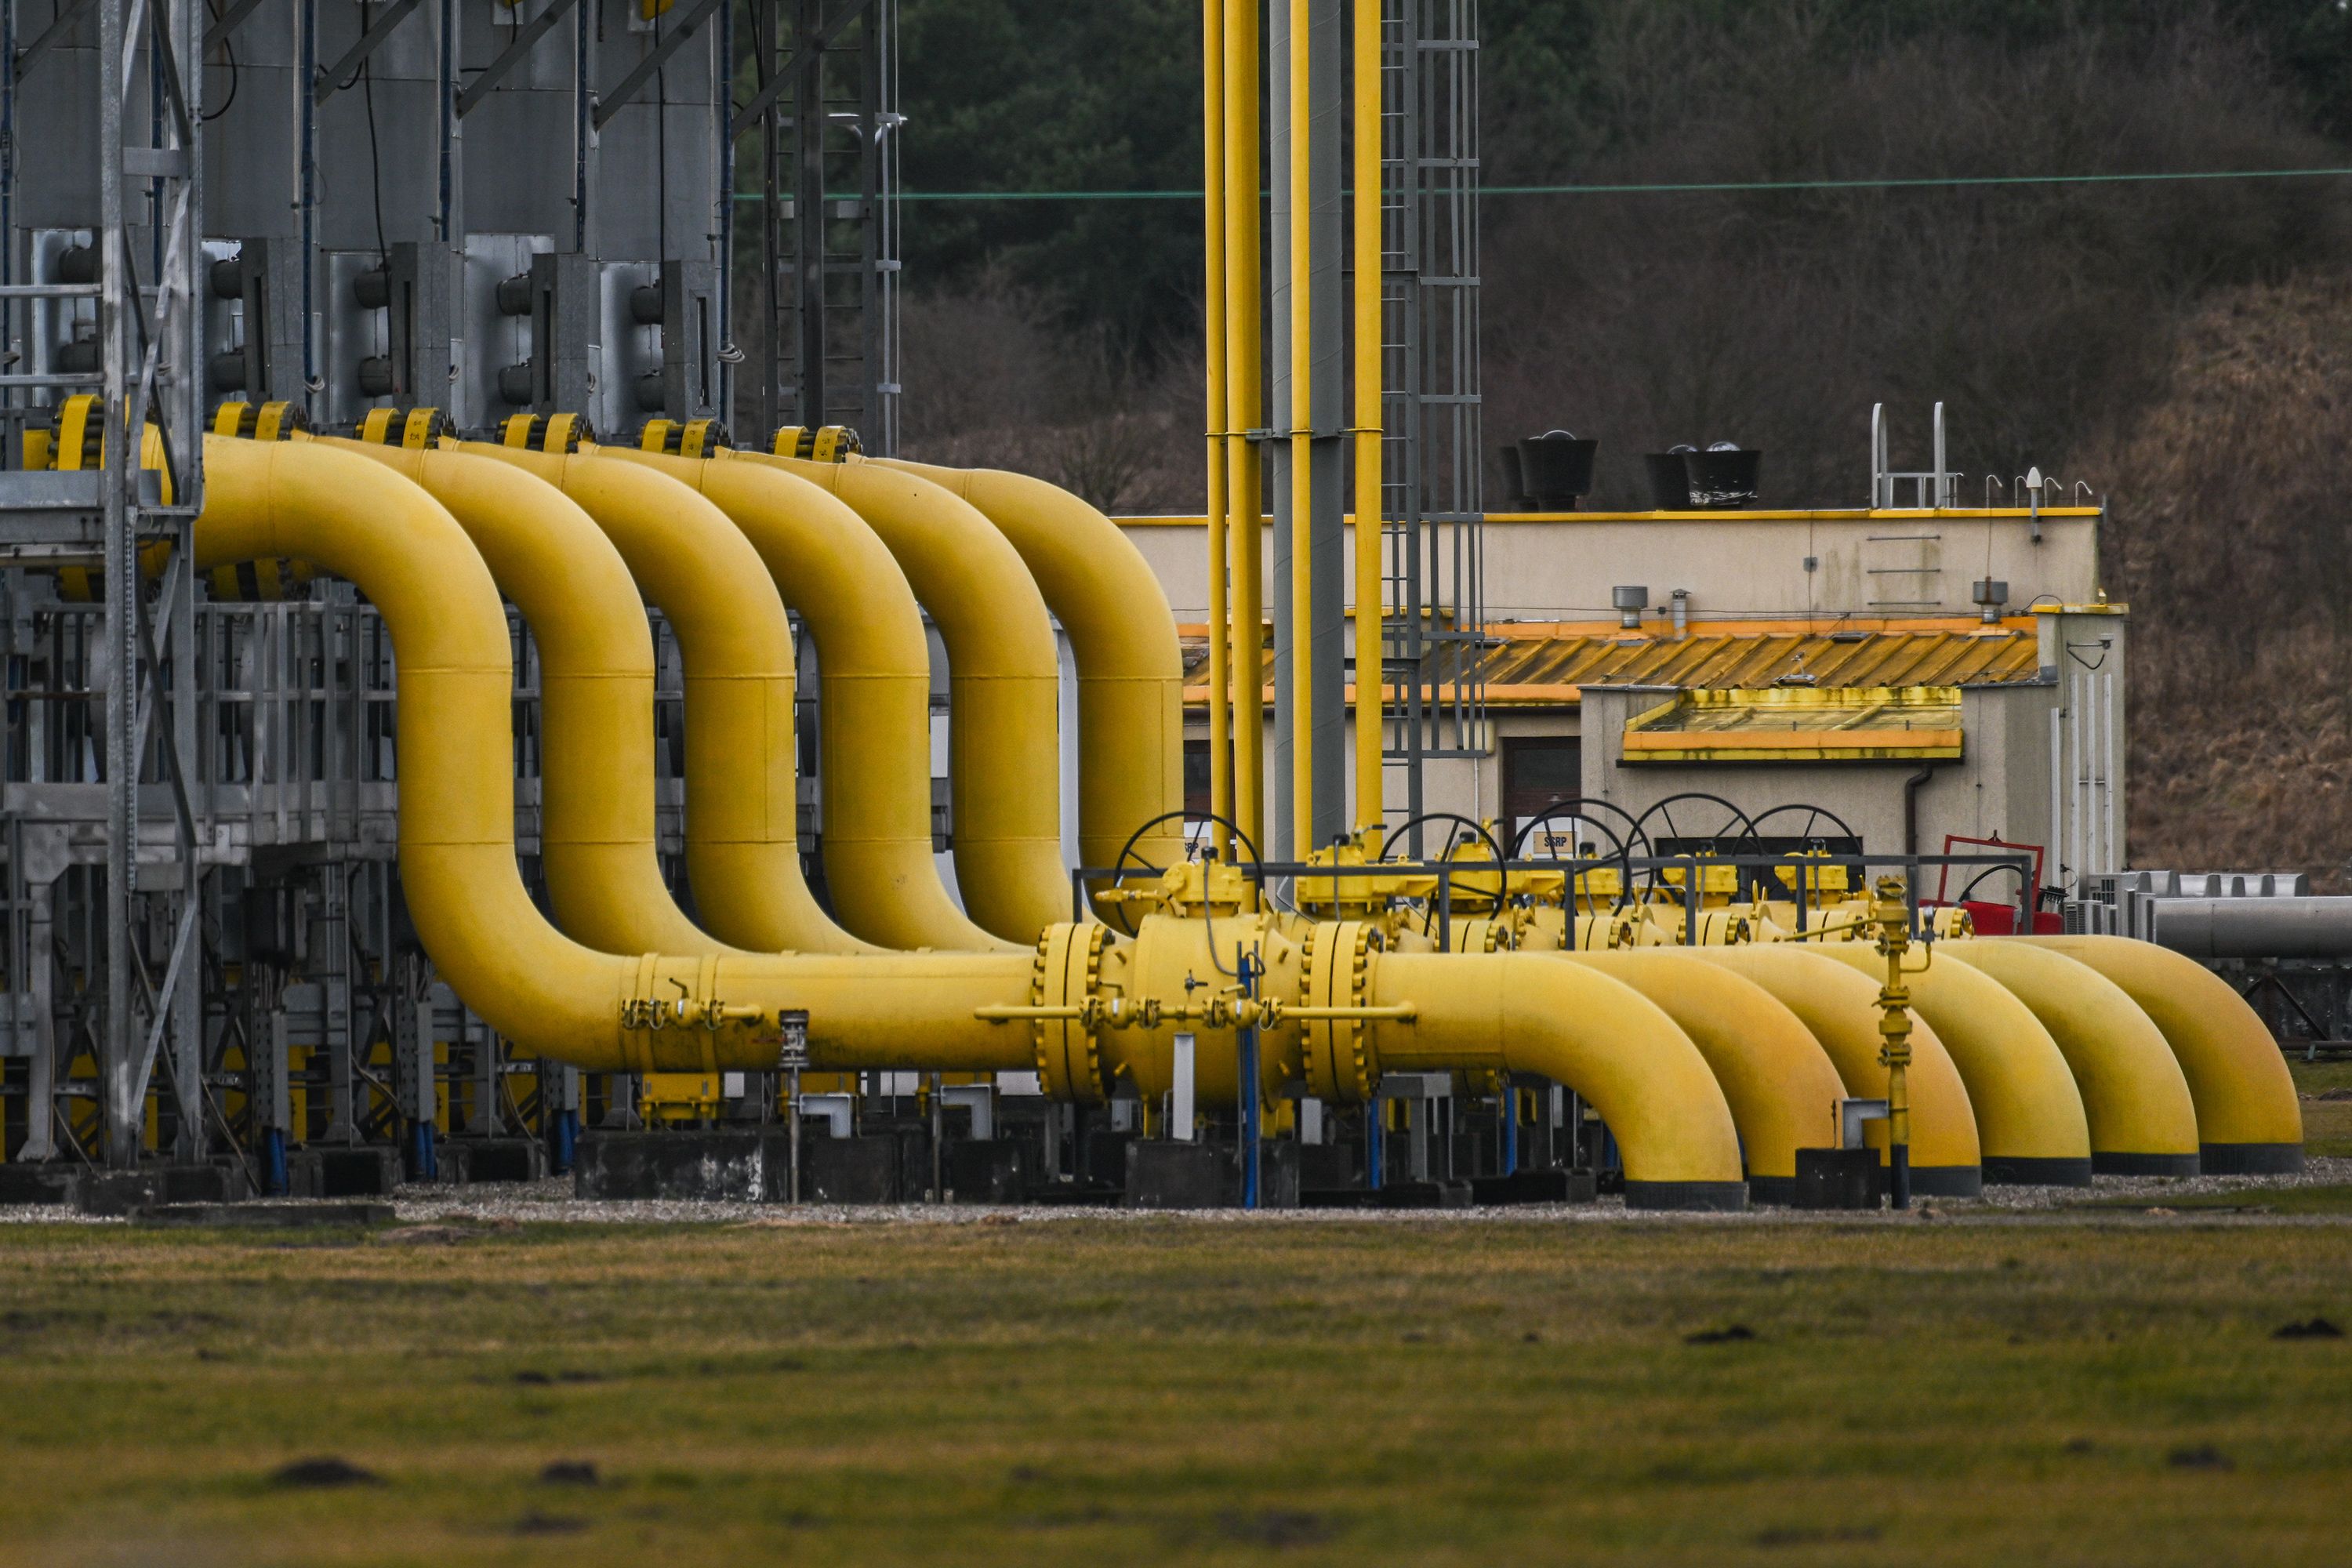 Latest Monthly Analysis Focuses on the Growing Importance of Gas Infrastructure in SE Europe